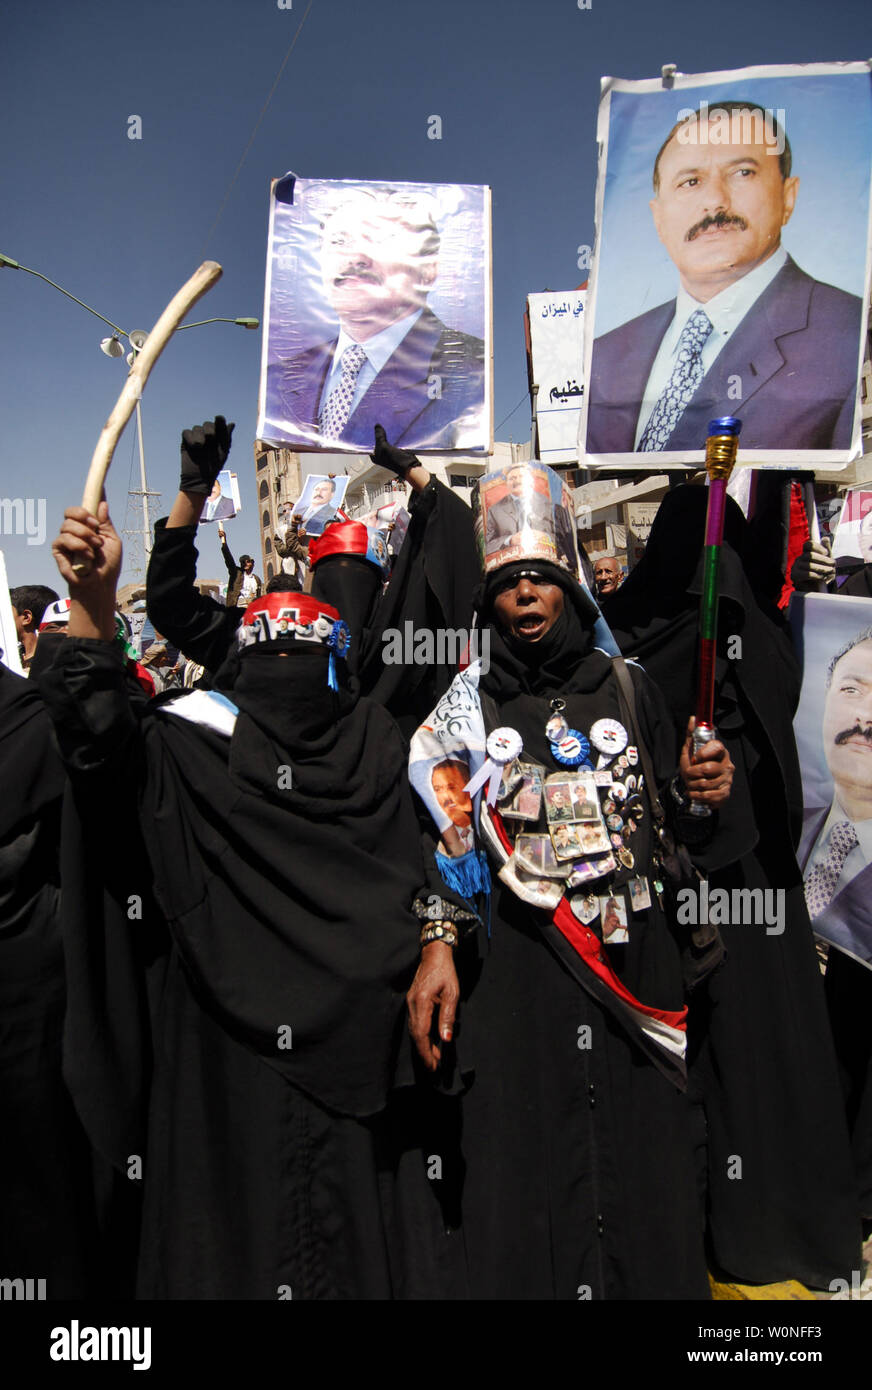 Yemeni protesters shout slogans in support of President Ali Abdullah Saleh in the capital Sanaa on February 25, 2011. The president has resisted pressure to resign but has promised not to seek re-election when his current term ends in 2013 and has promised political reforms.  UPI Stock Photo